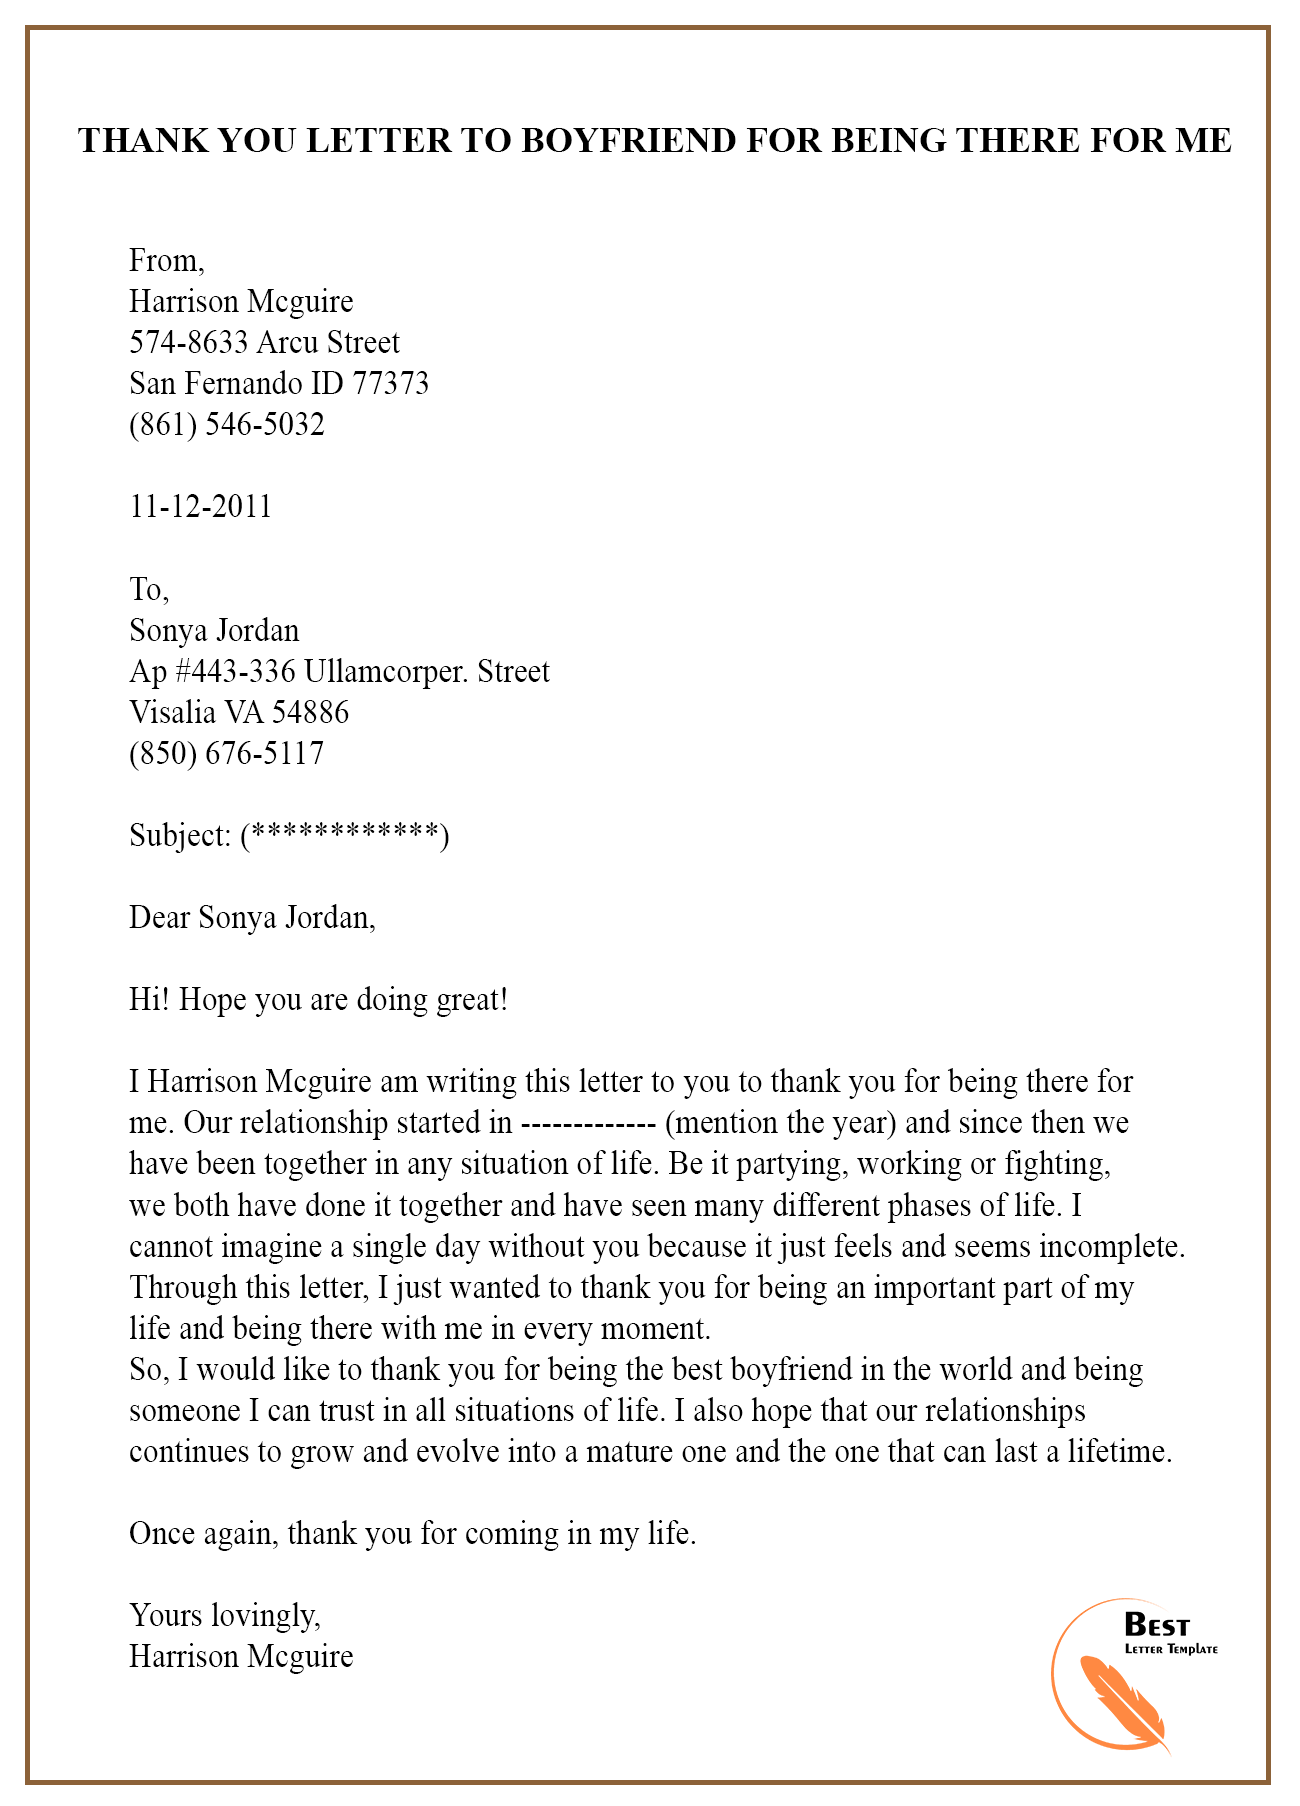 Thank you Letter Template To Boyfriend - Sample & Examples